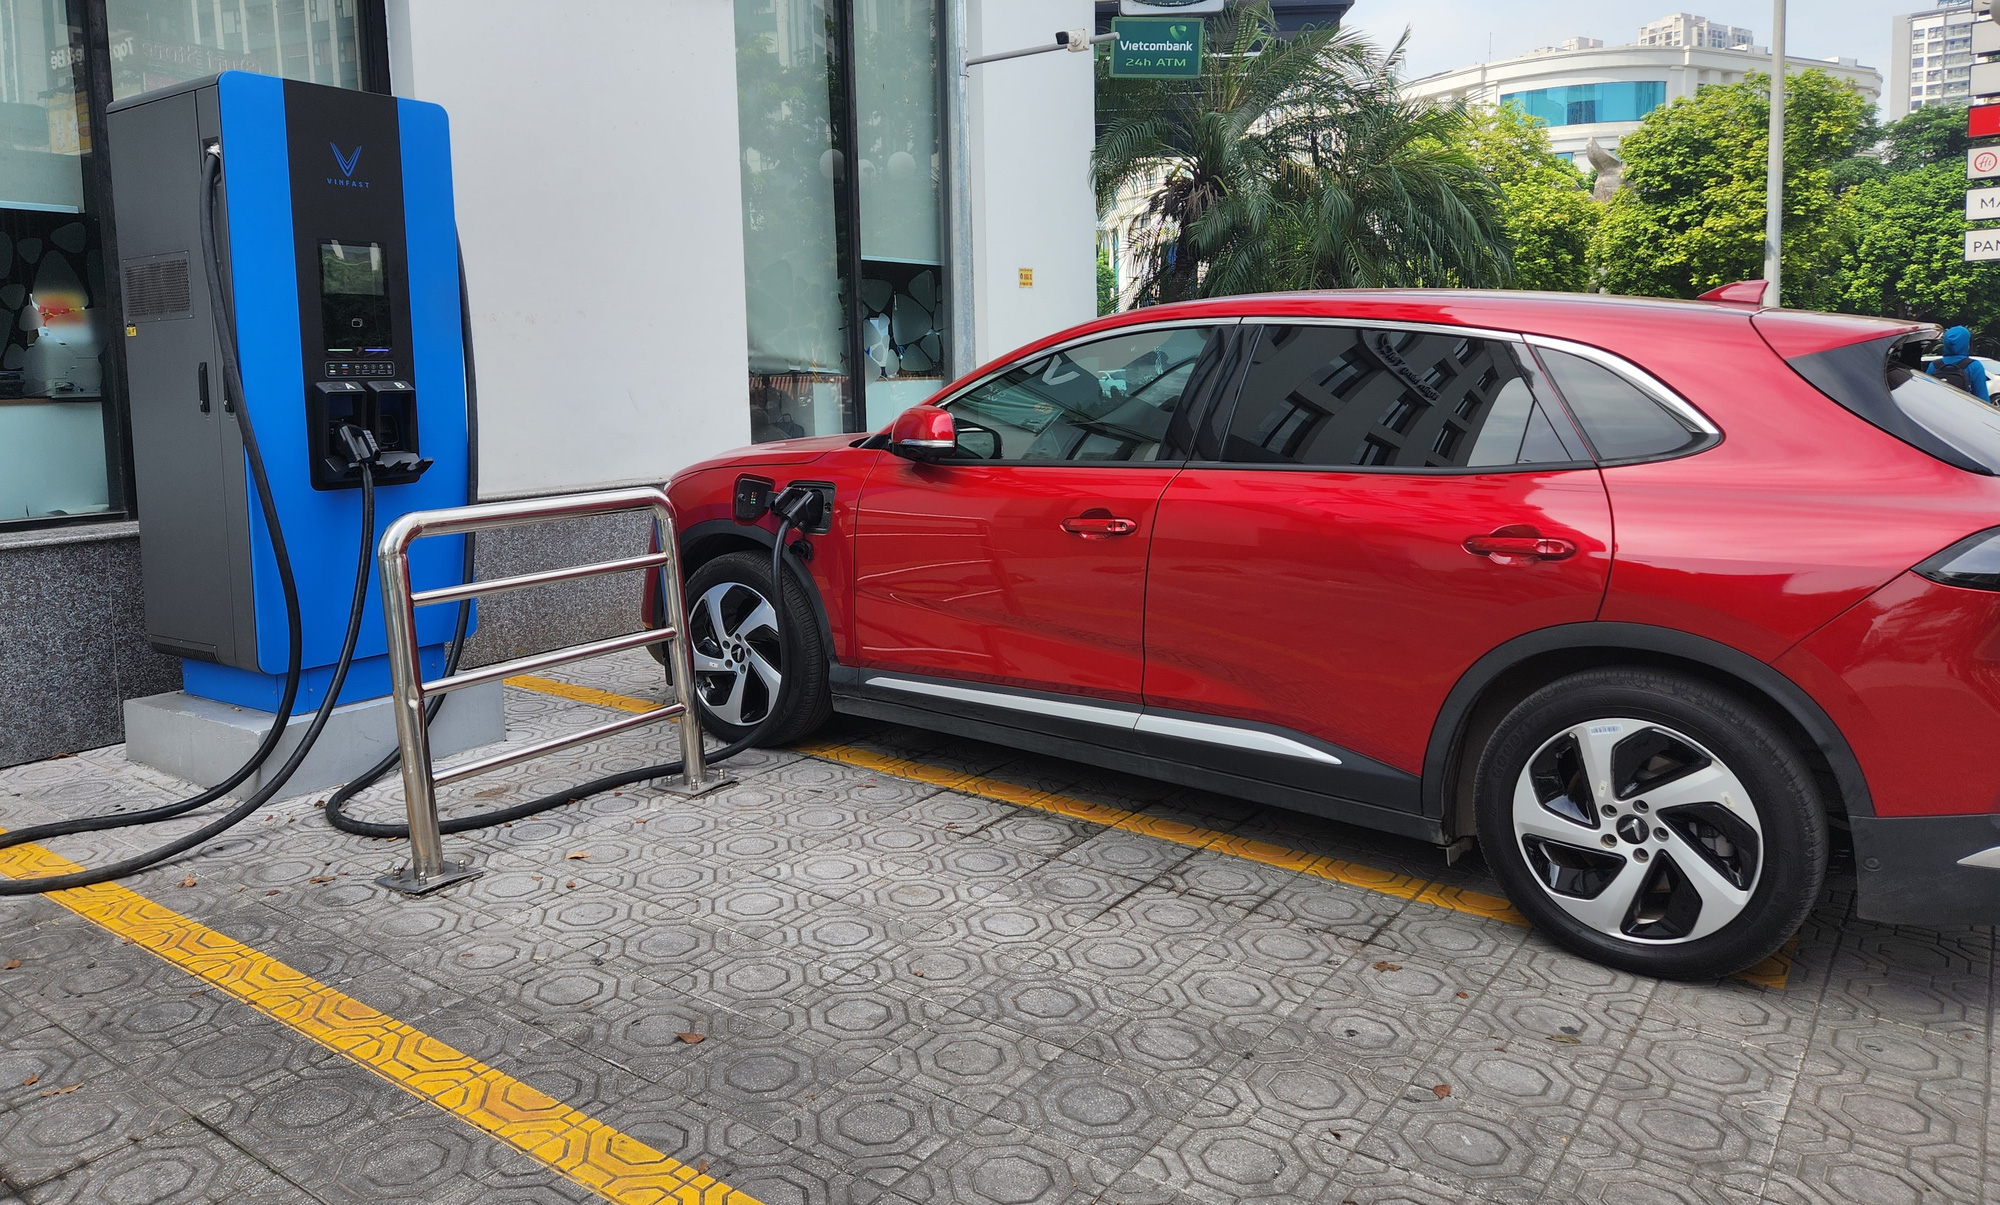 Access to charging stations is one of the factors that many people consider when looking to use electric cars - Photo: Tuan Phung